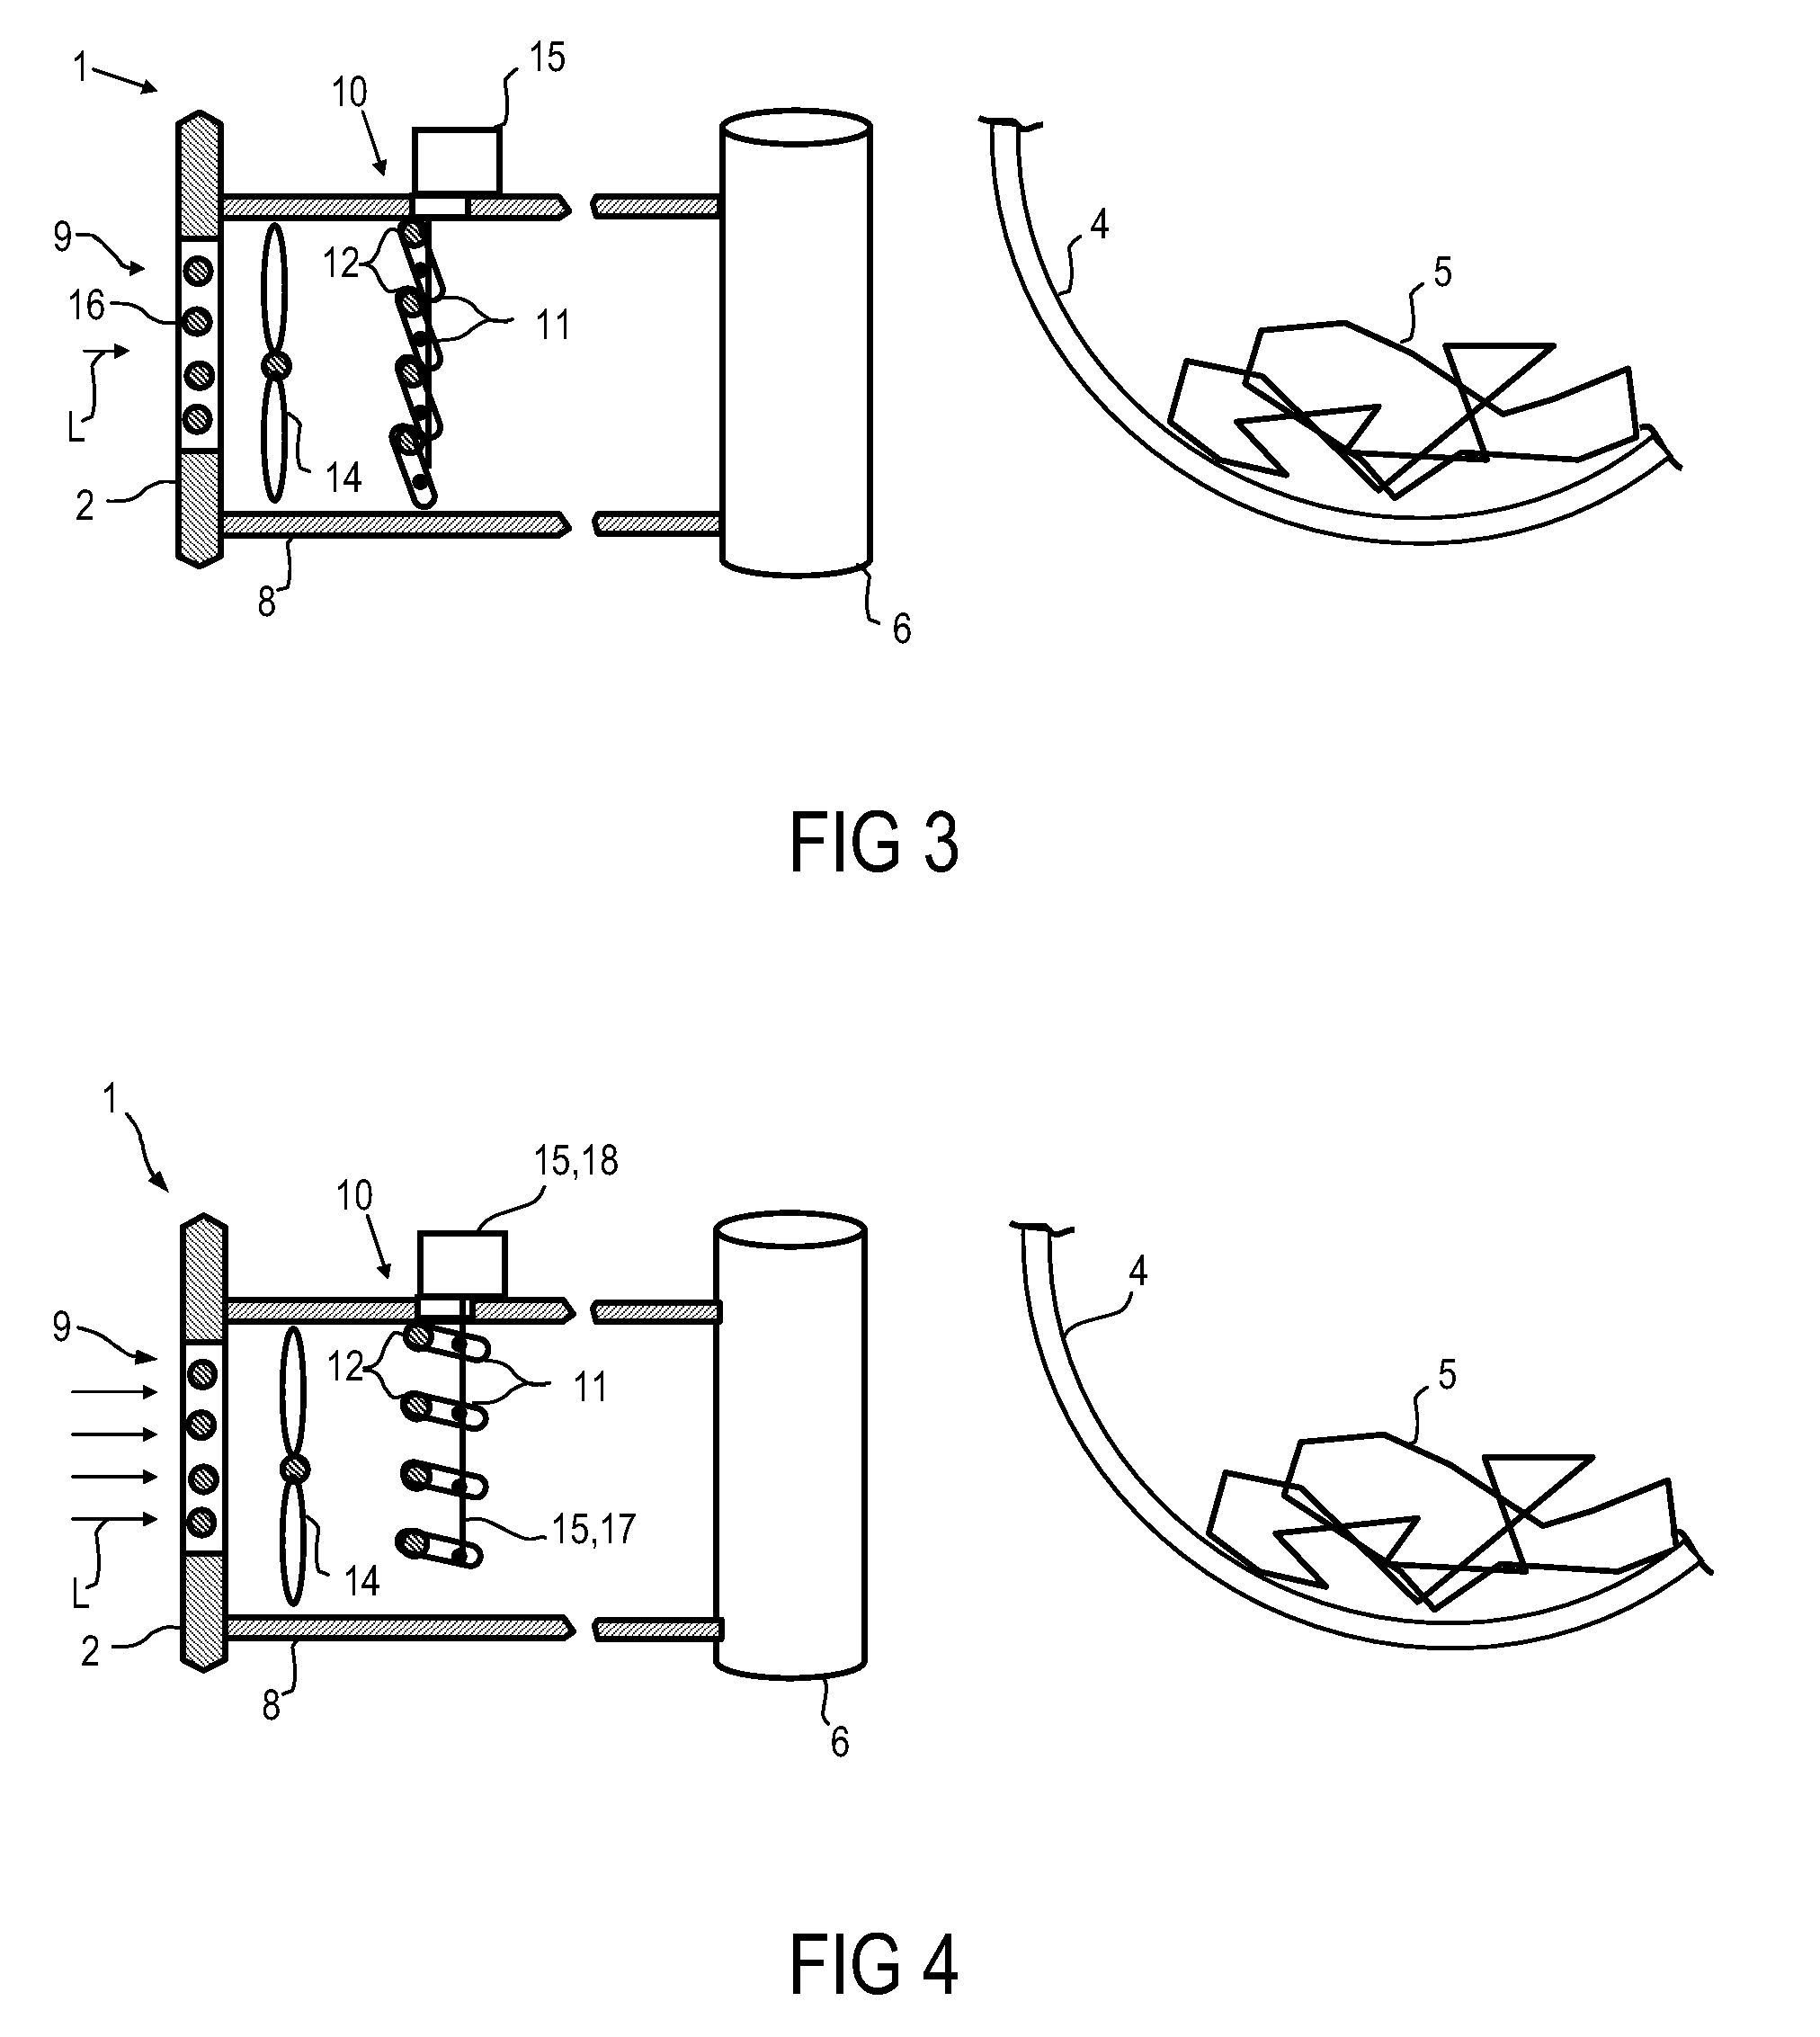 Domestic appliance with an open air duct